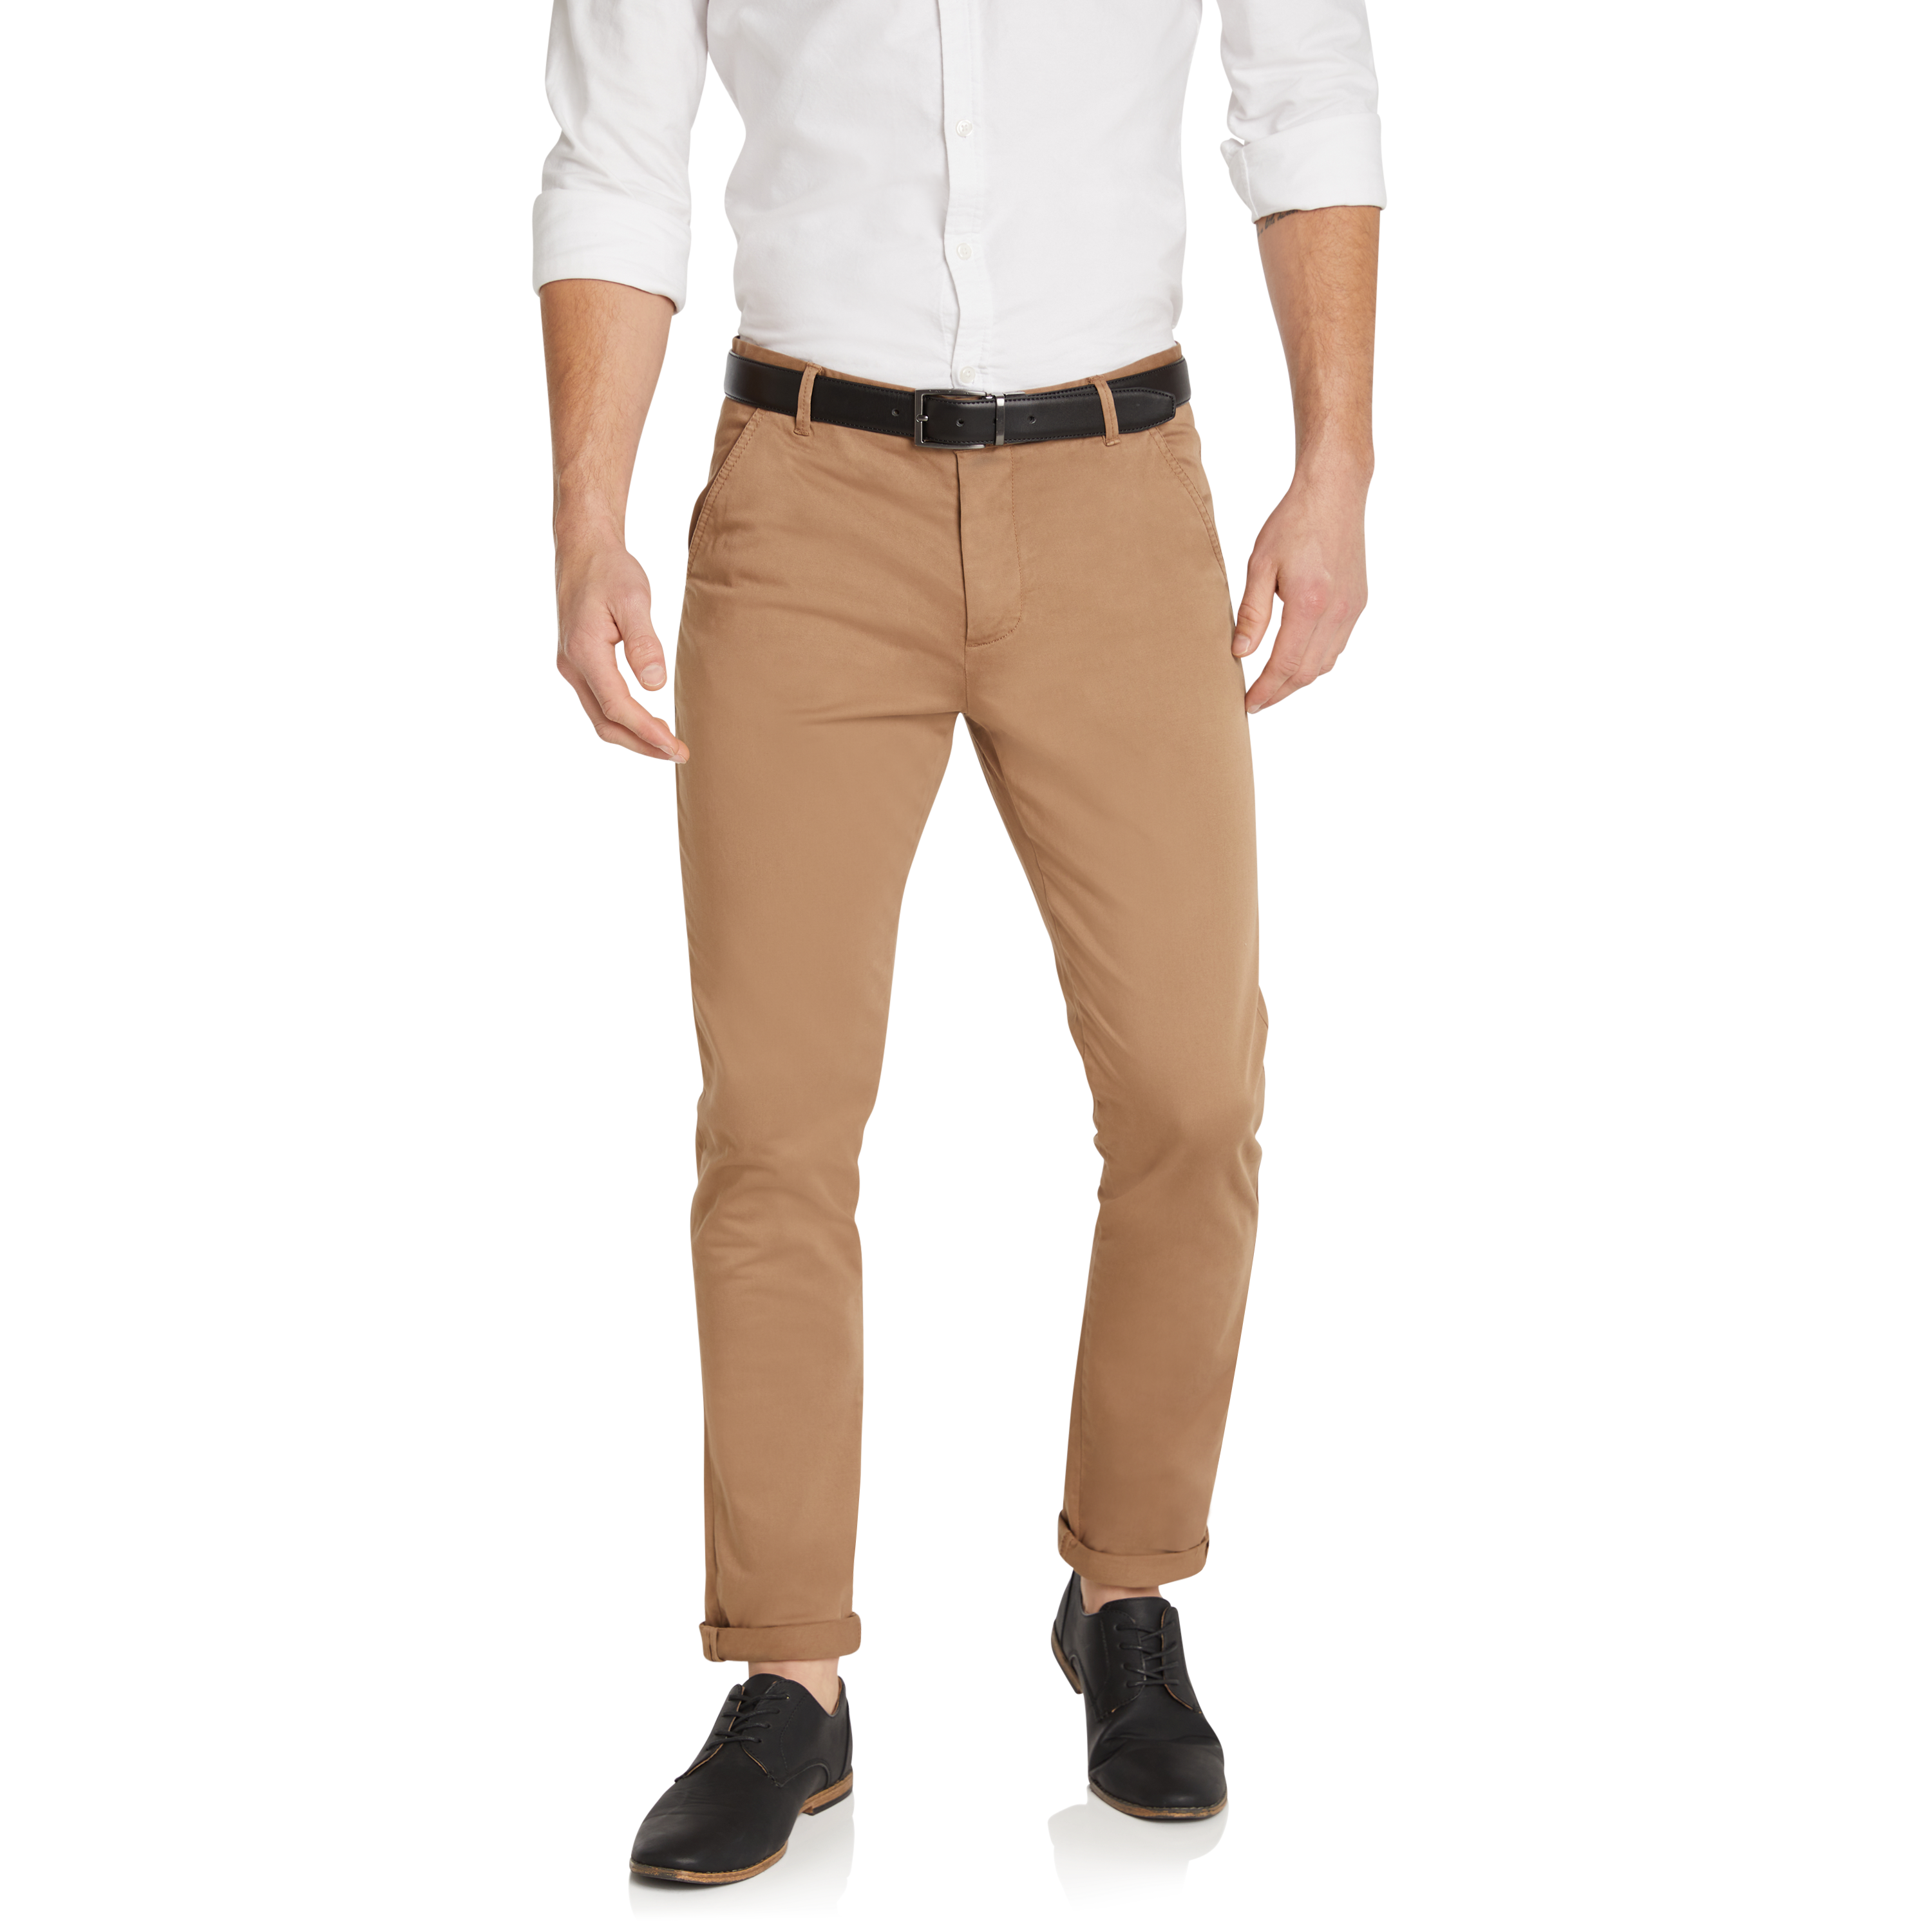 Slim Uniform Non-Stretch Chino Pants for Men | Old Navy